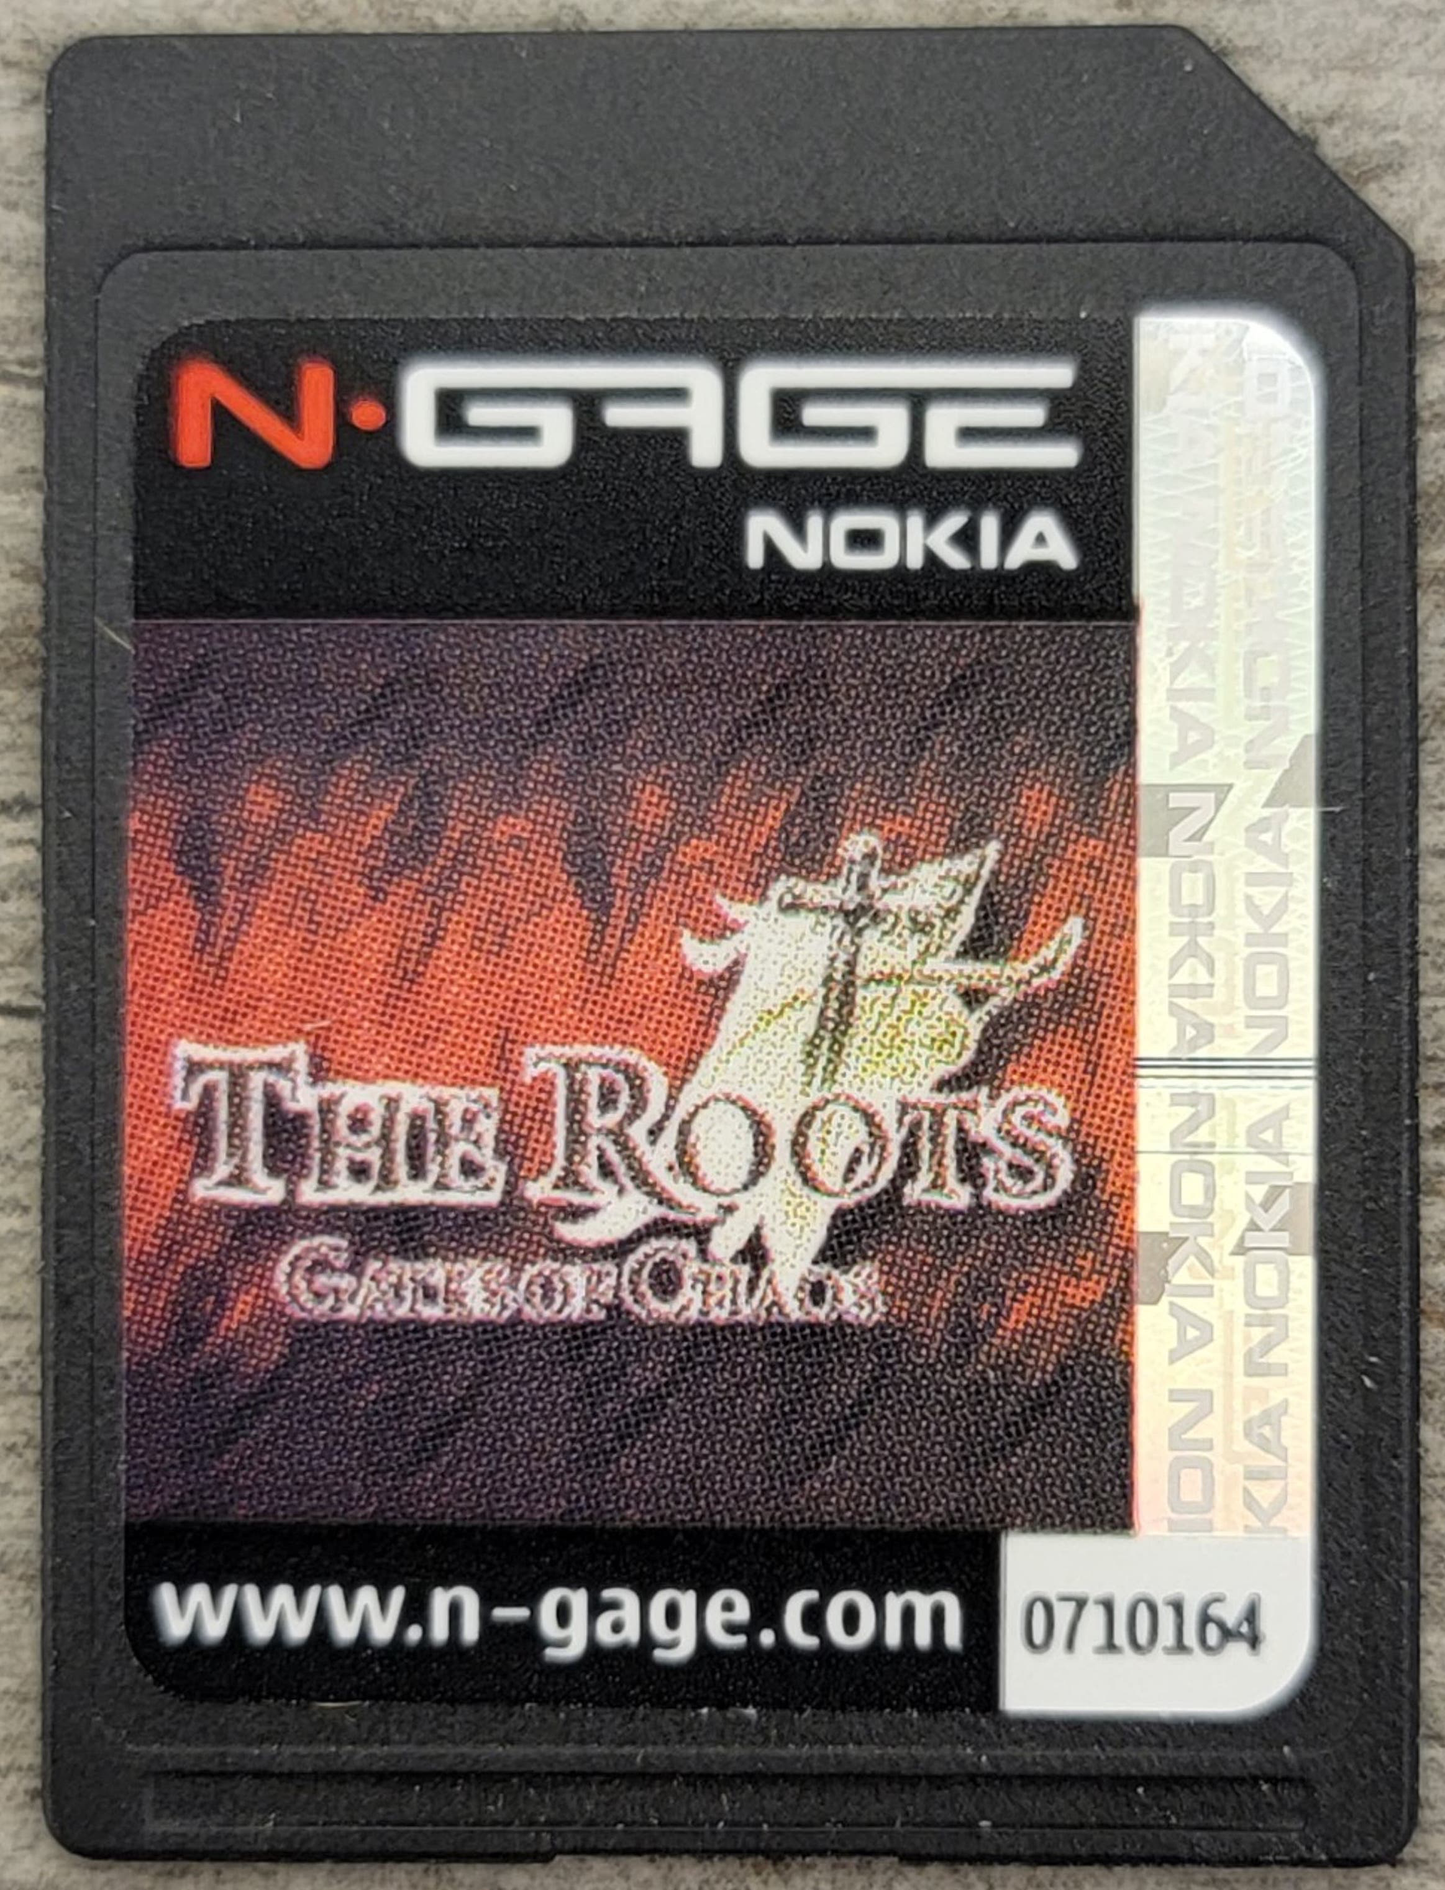 Roots: Gates of Chaos, The - Nokia N Gage